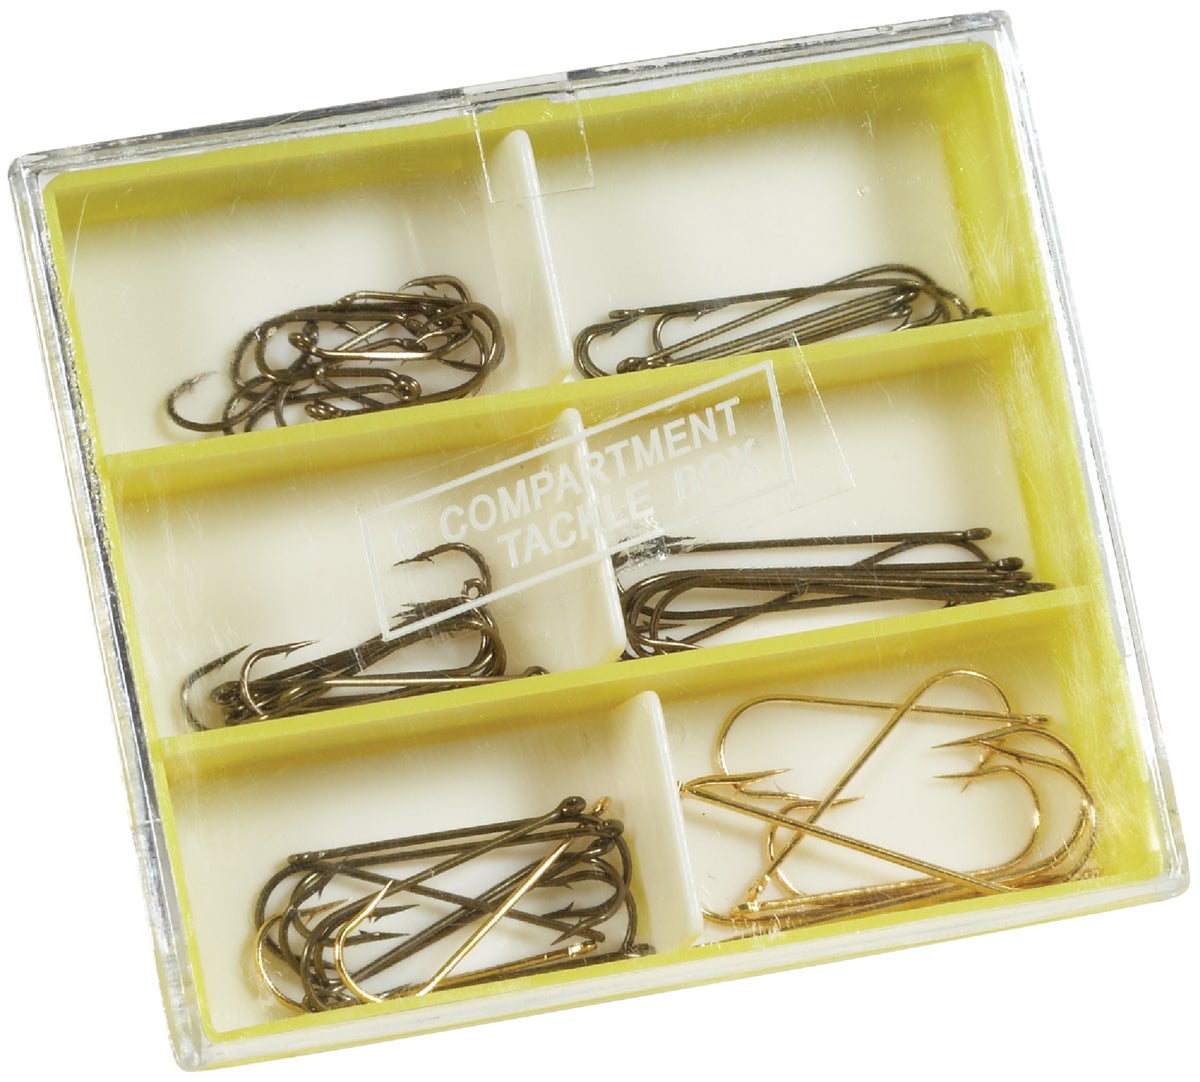 Buy SouthBend Crappie & Panfish Hook Kit Assortment